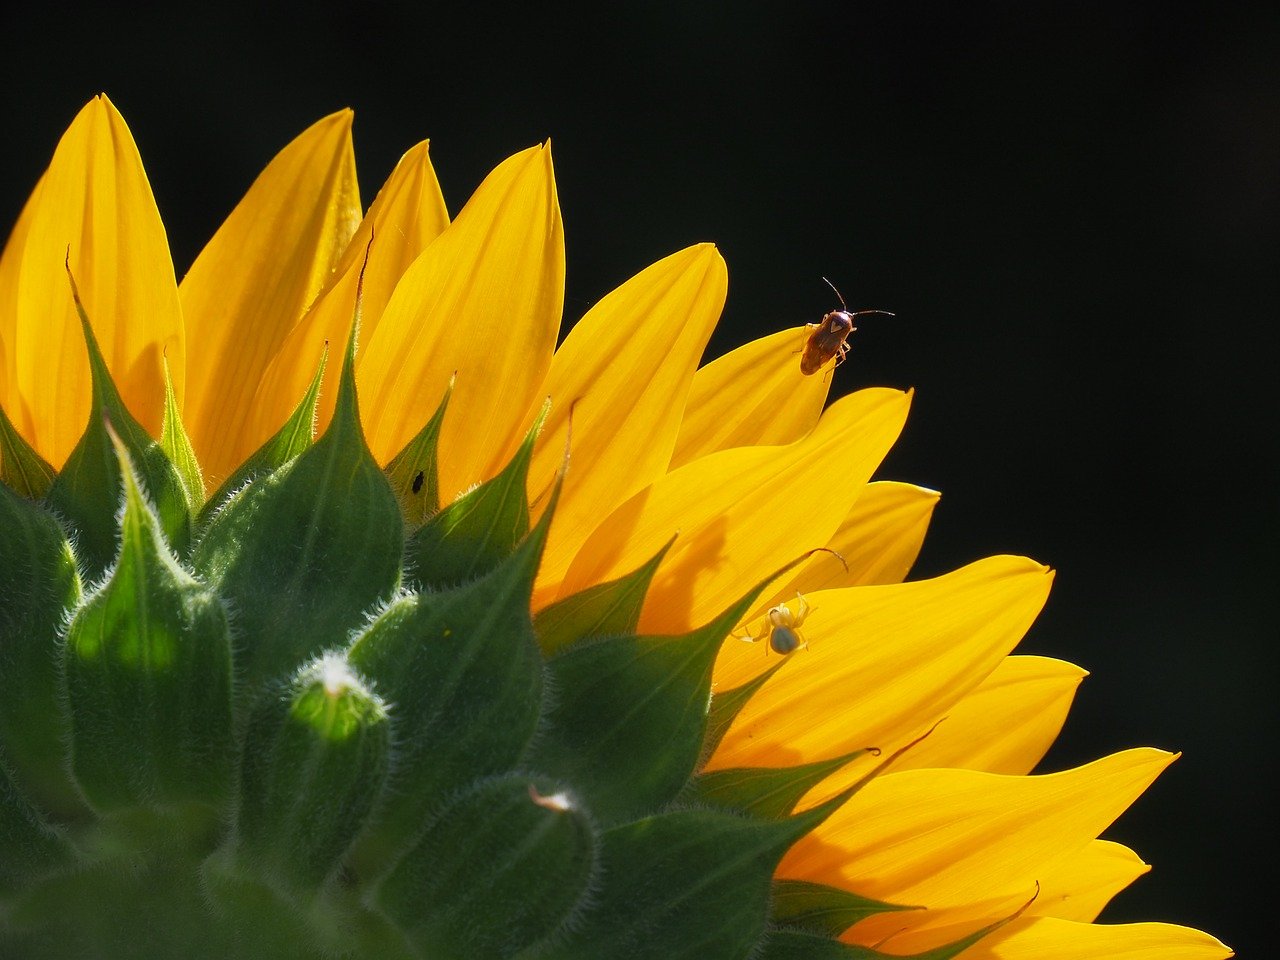 sunflower, beetle, insects-8181484.jpg